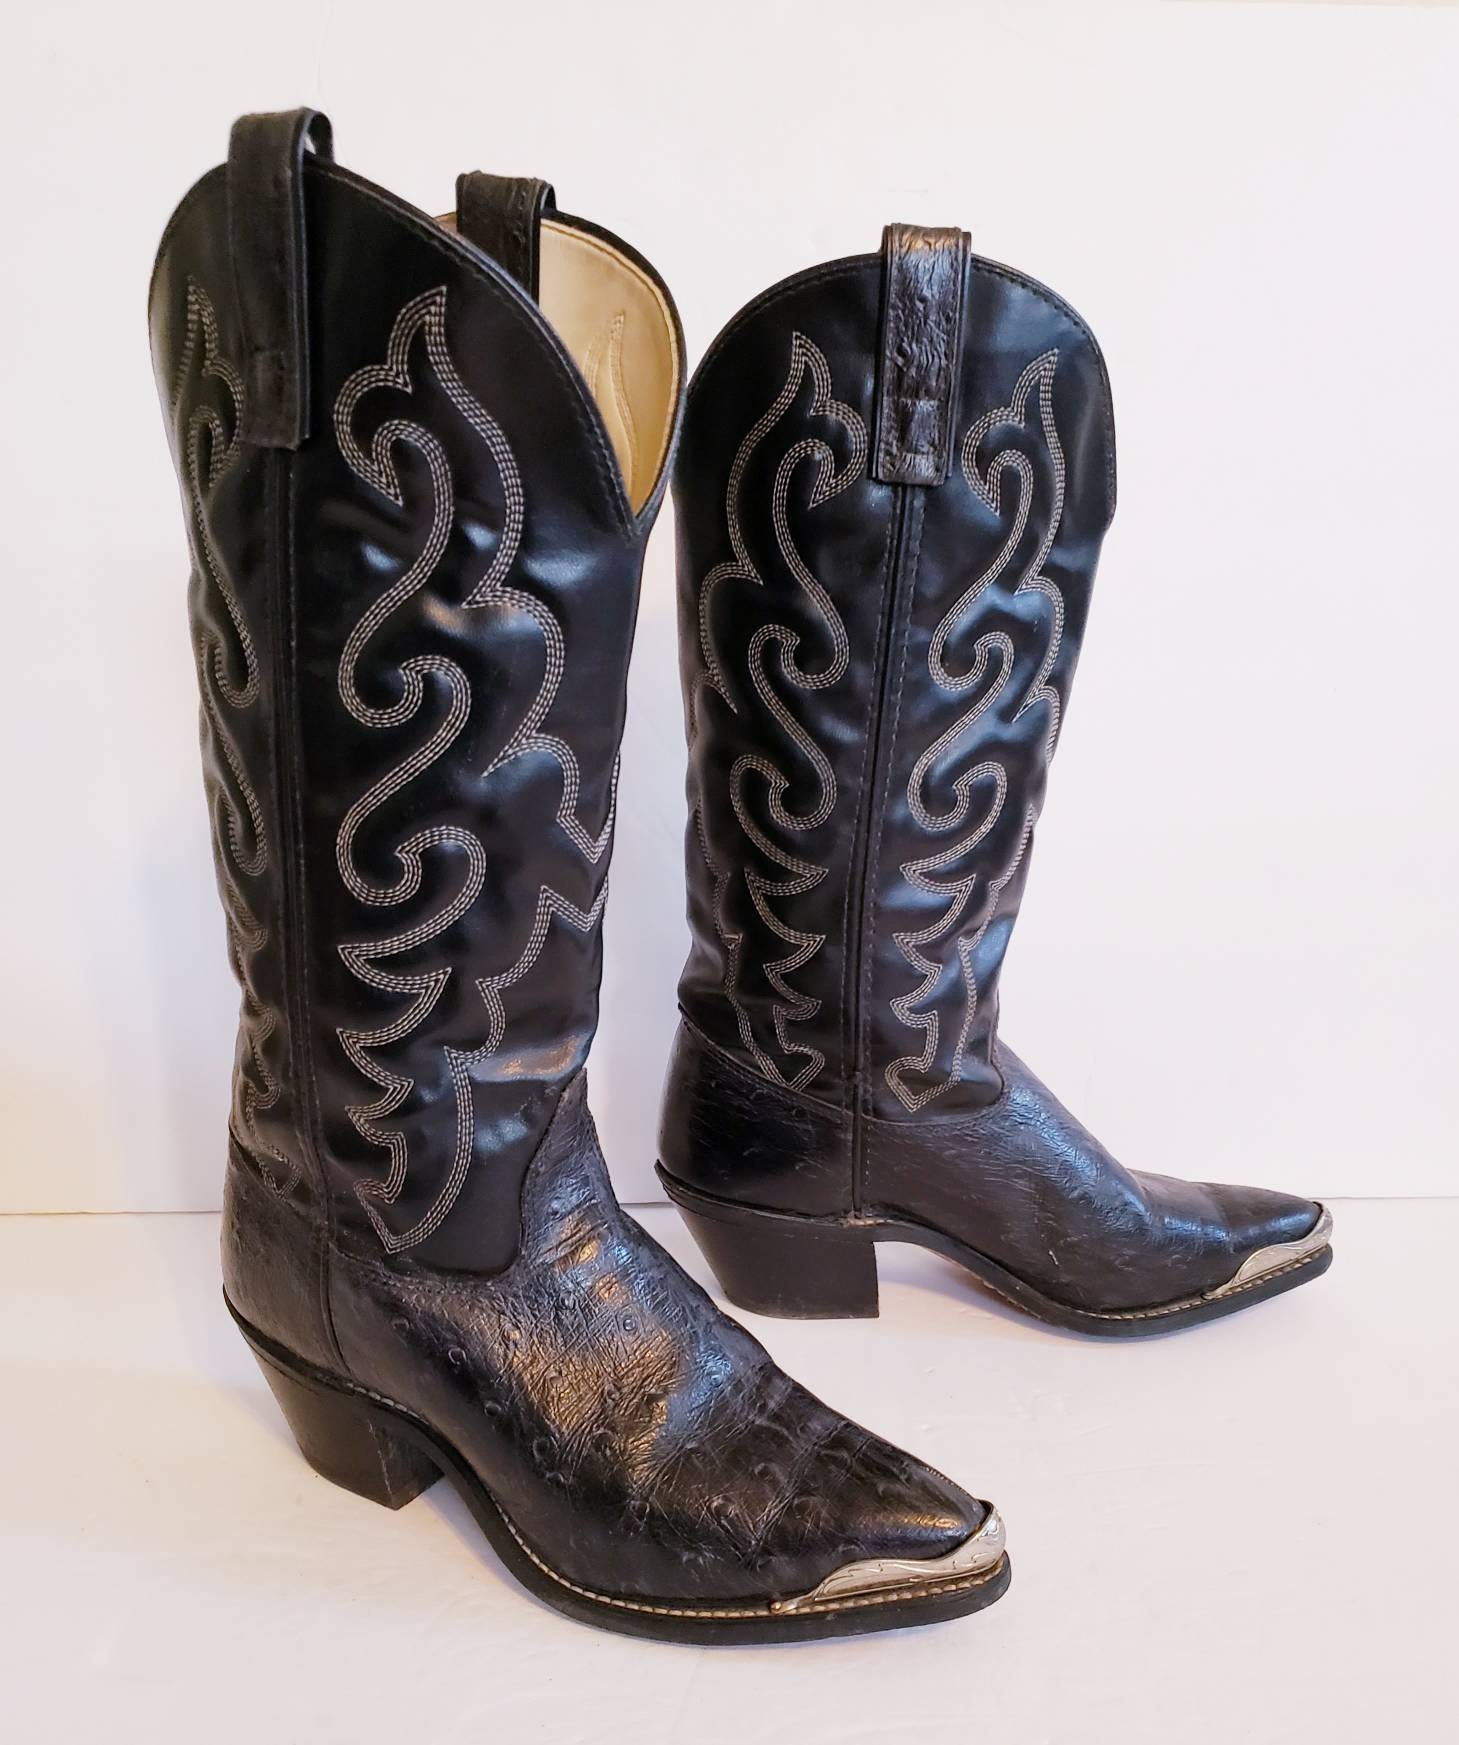 Vintage Black Tooled Leather Ostrich Cowboy Boots by Texas / | Etsy